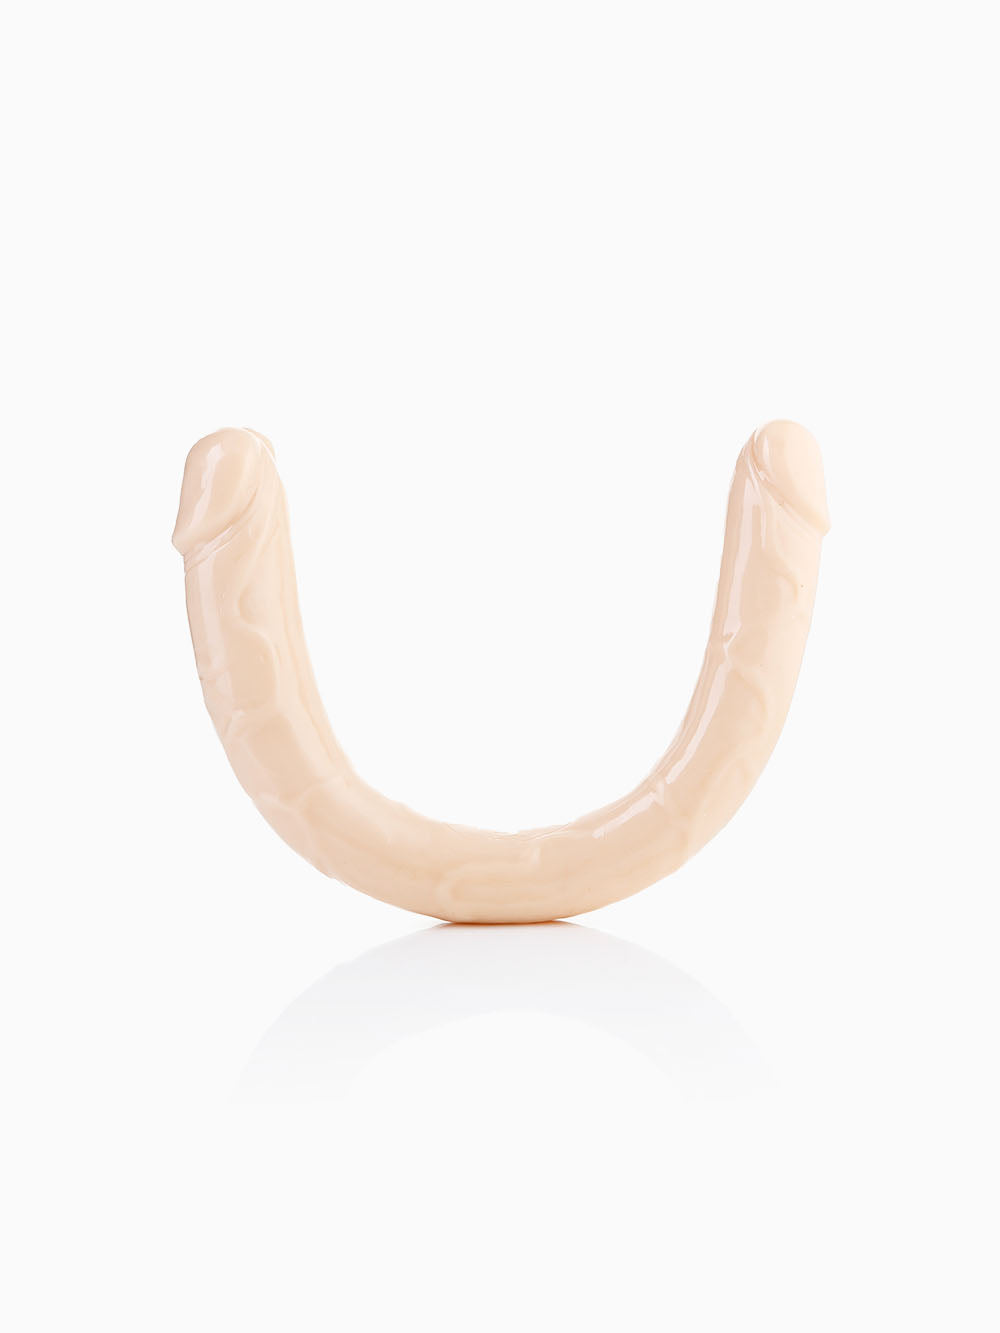 Pillow Talk Ultimate Dildo, 15.5 Inches, Nude